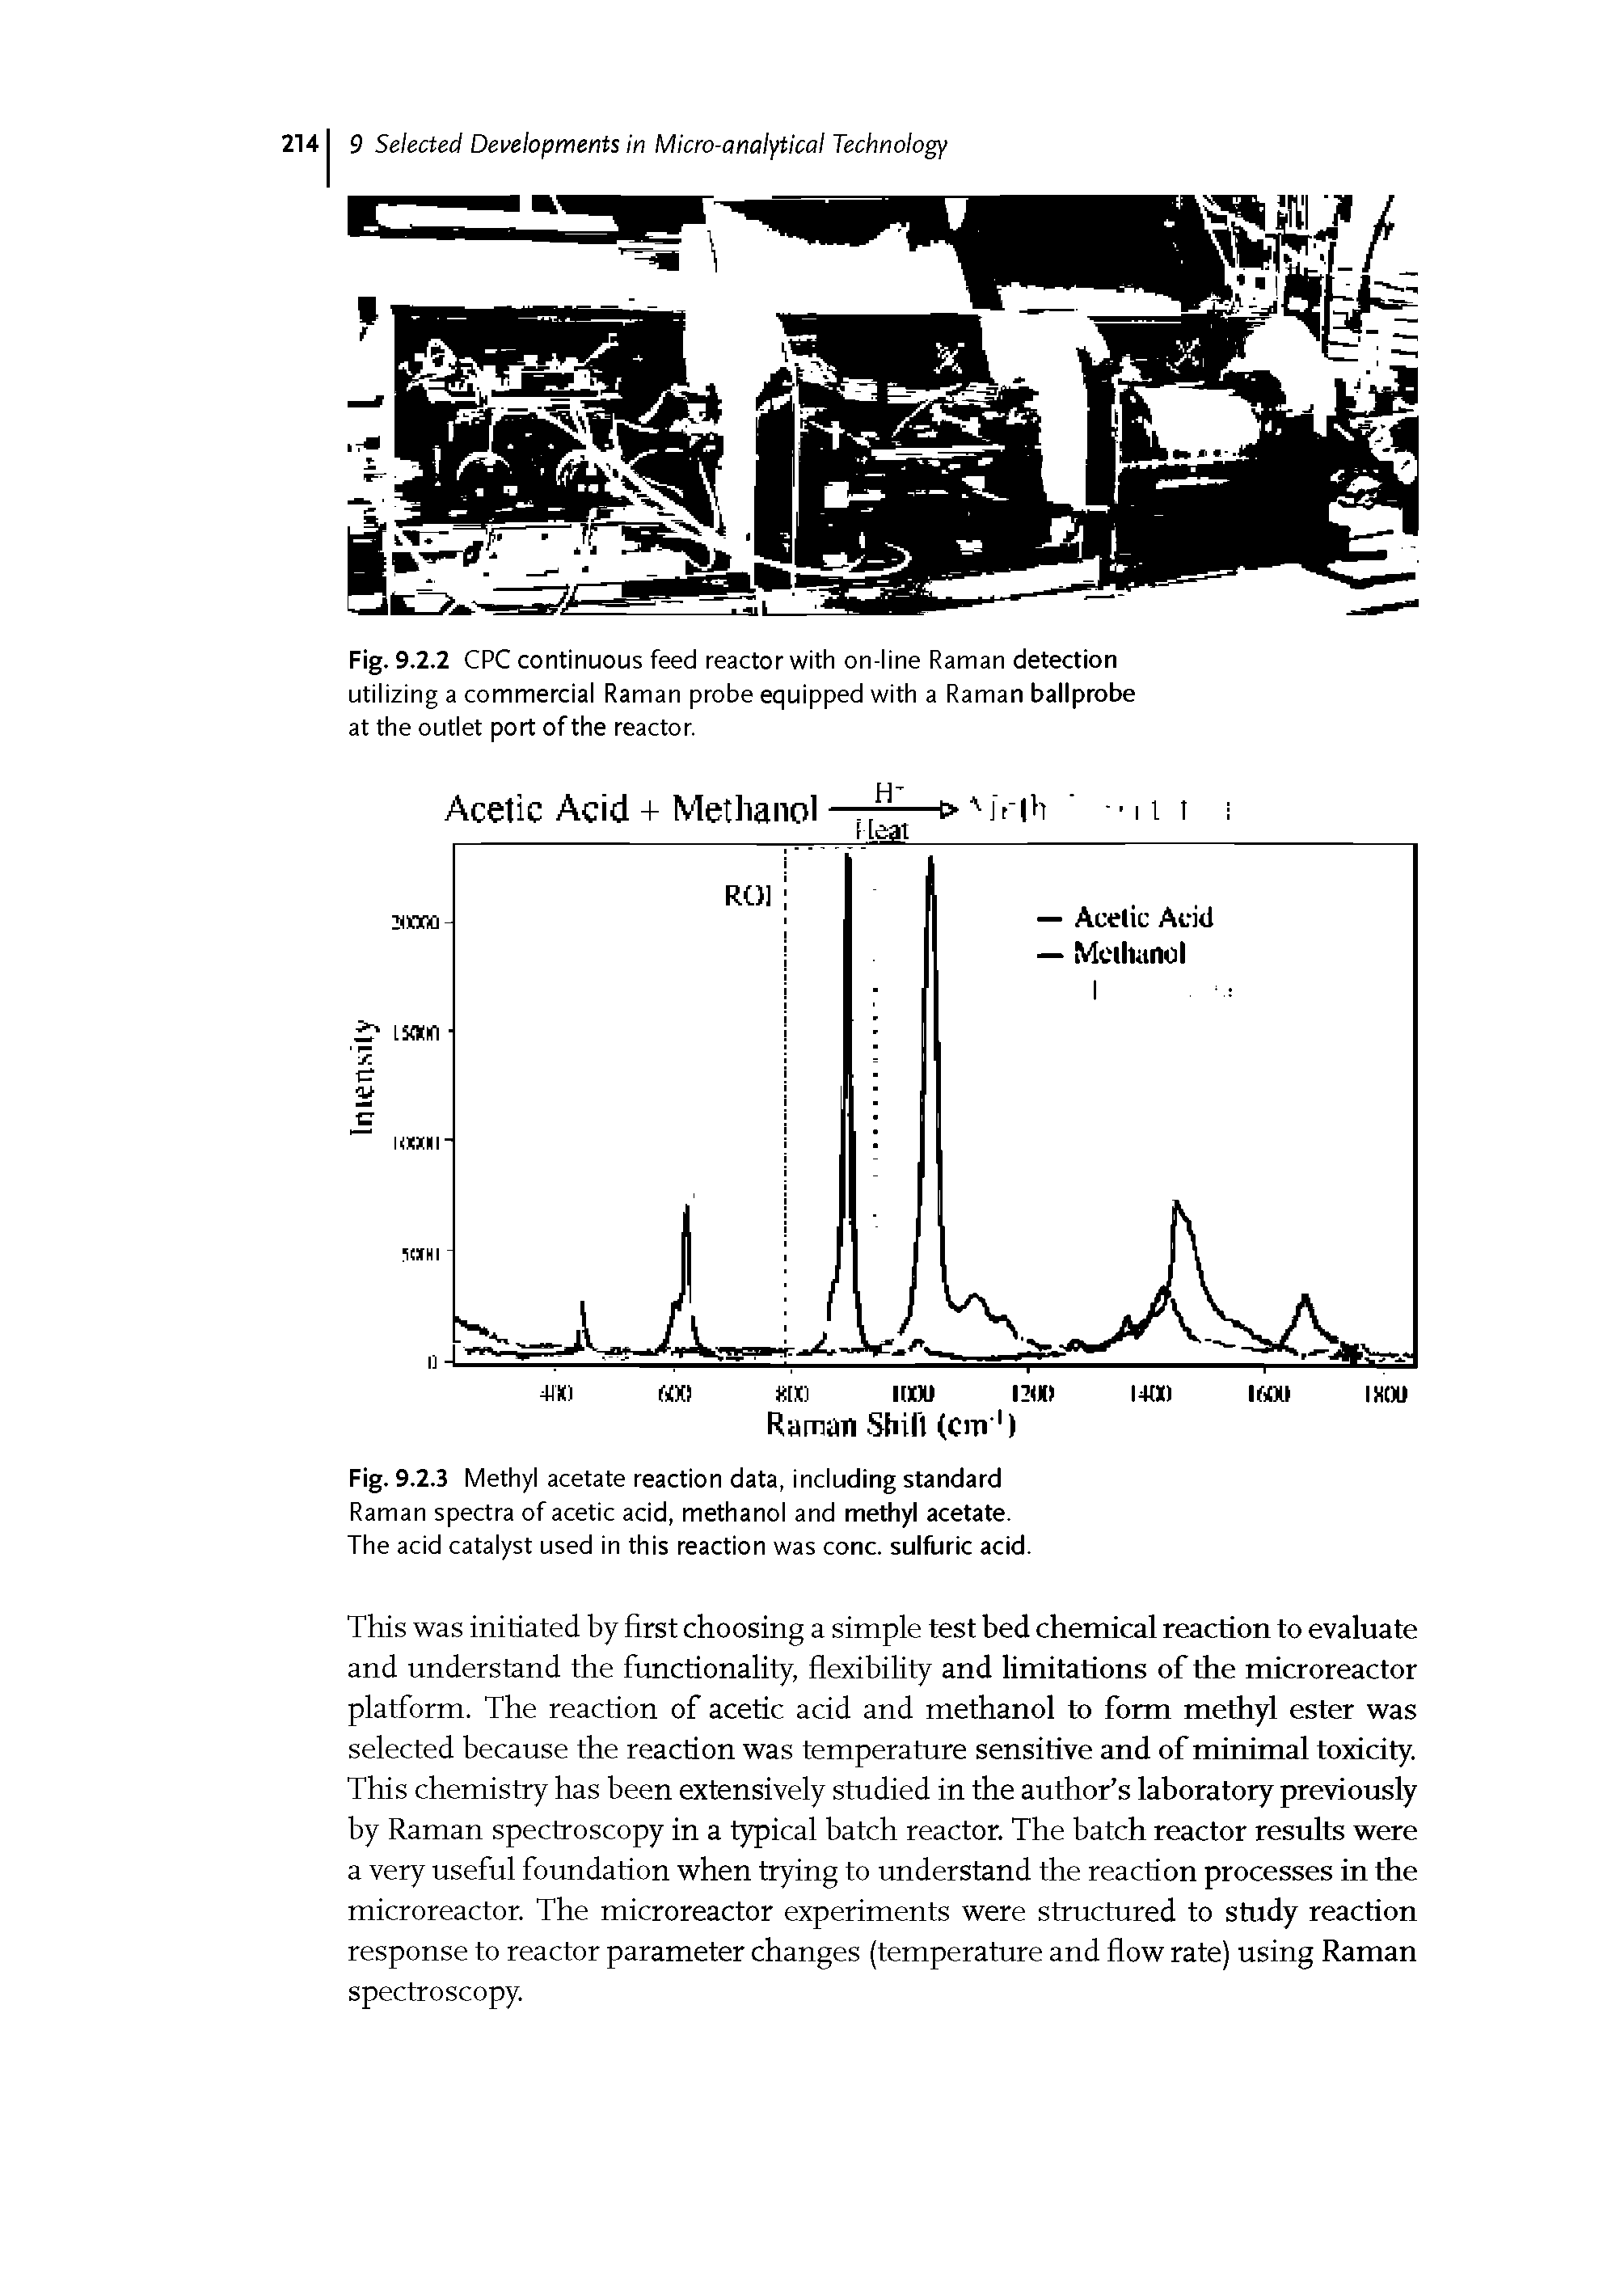 Fig. 9.2.3 Methyl acetate reaction data, including standard Raman spectra of acetic acid, methanol and methyl acetate. The acid catalyst used in this reaction was cone, sulfuric acid.